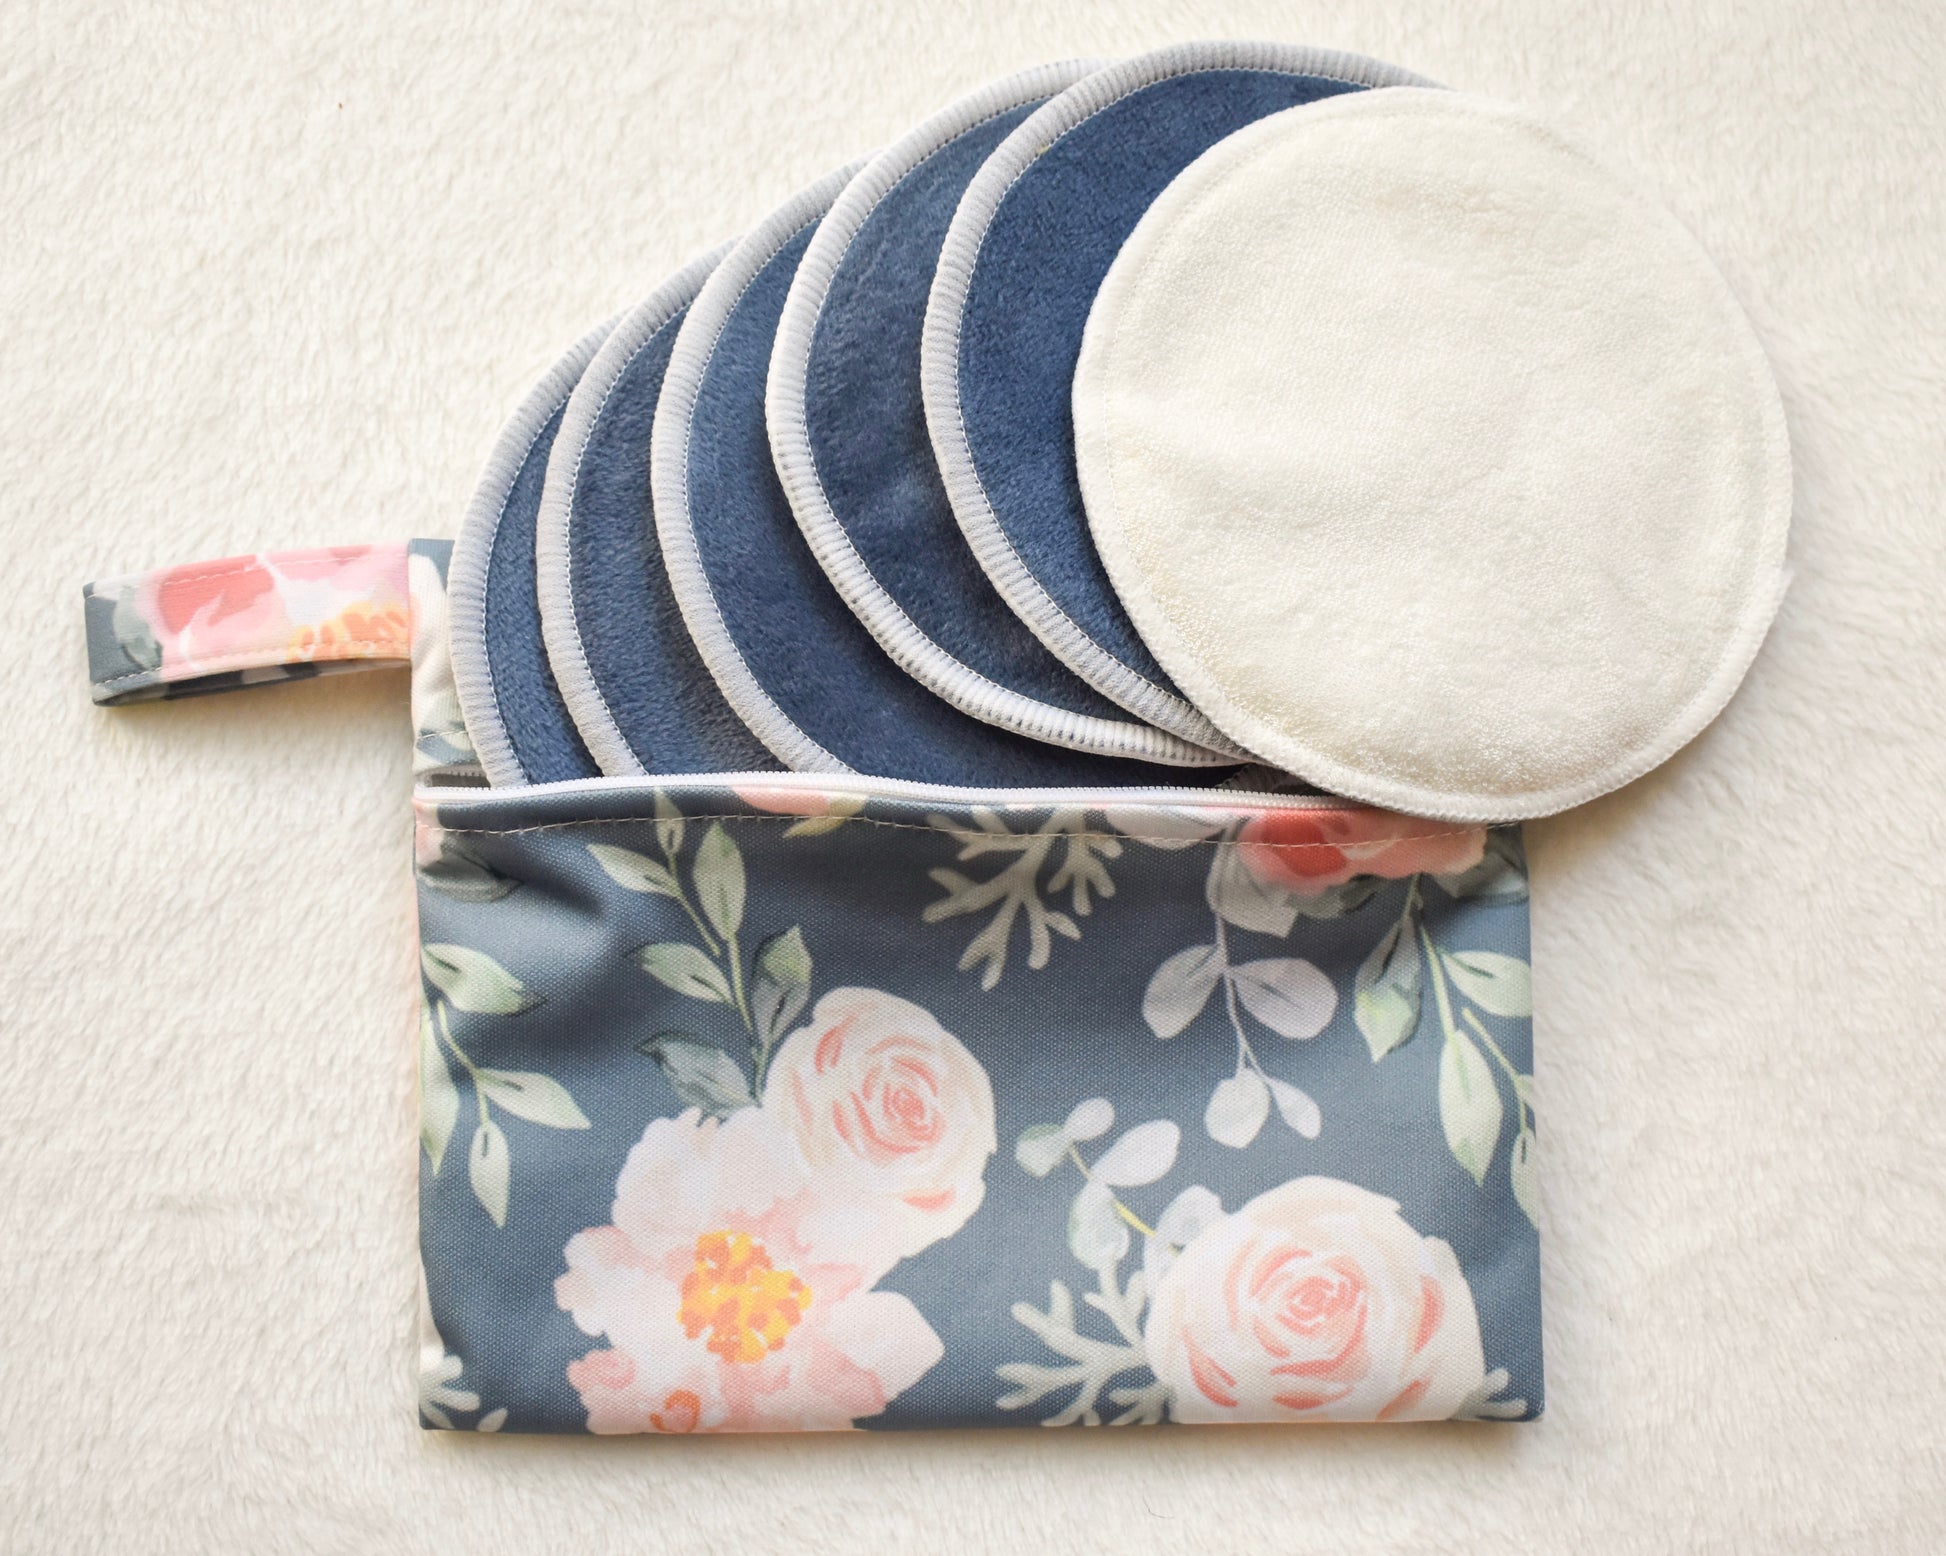 Bamboo Reusable Breast Pads: Slim and absorbent - LittleLamb